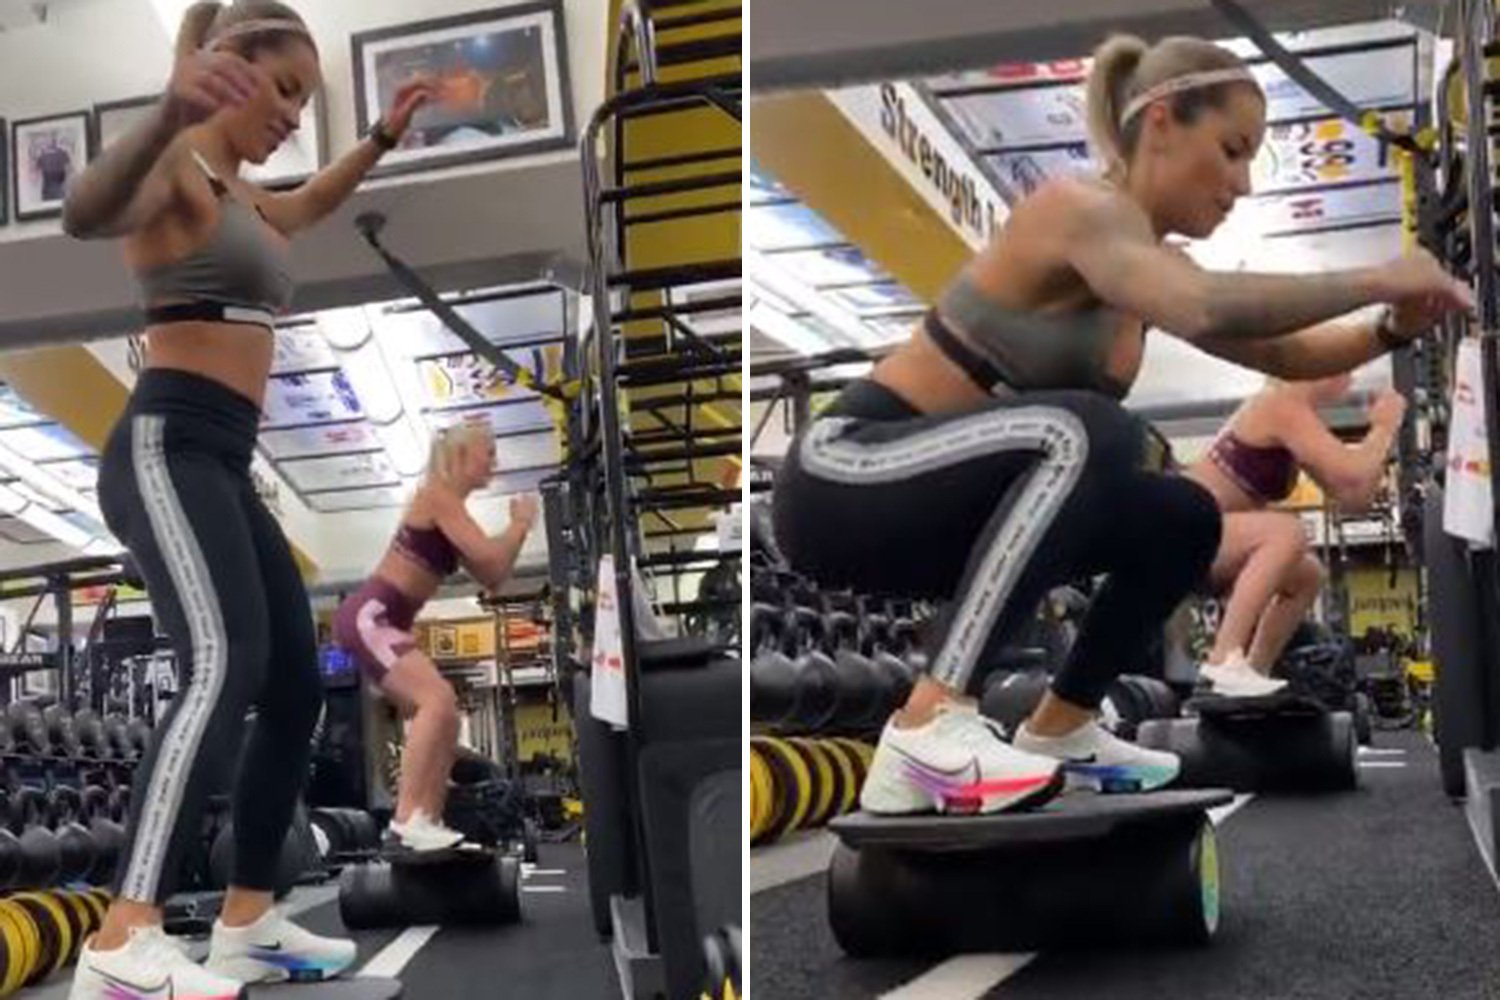 Tiger Woods' ex Vonn wobbles on a balancing board with skateboarding pal Bufoni